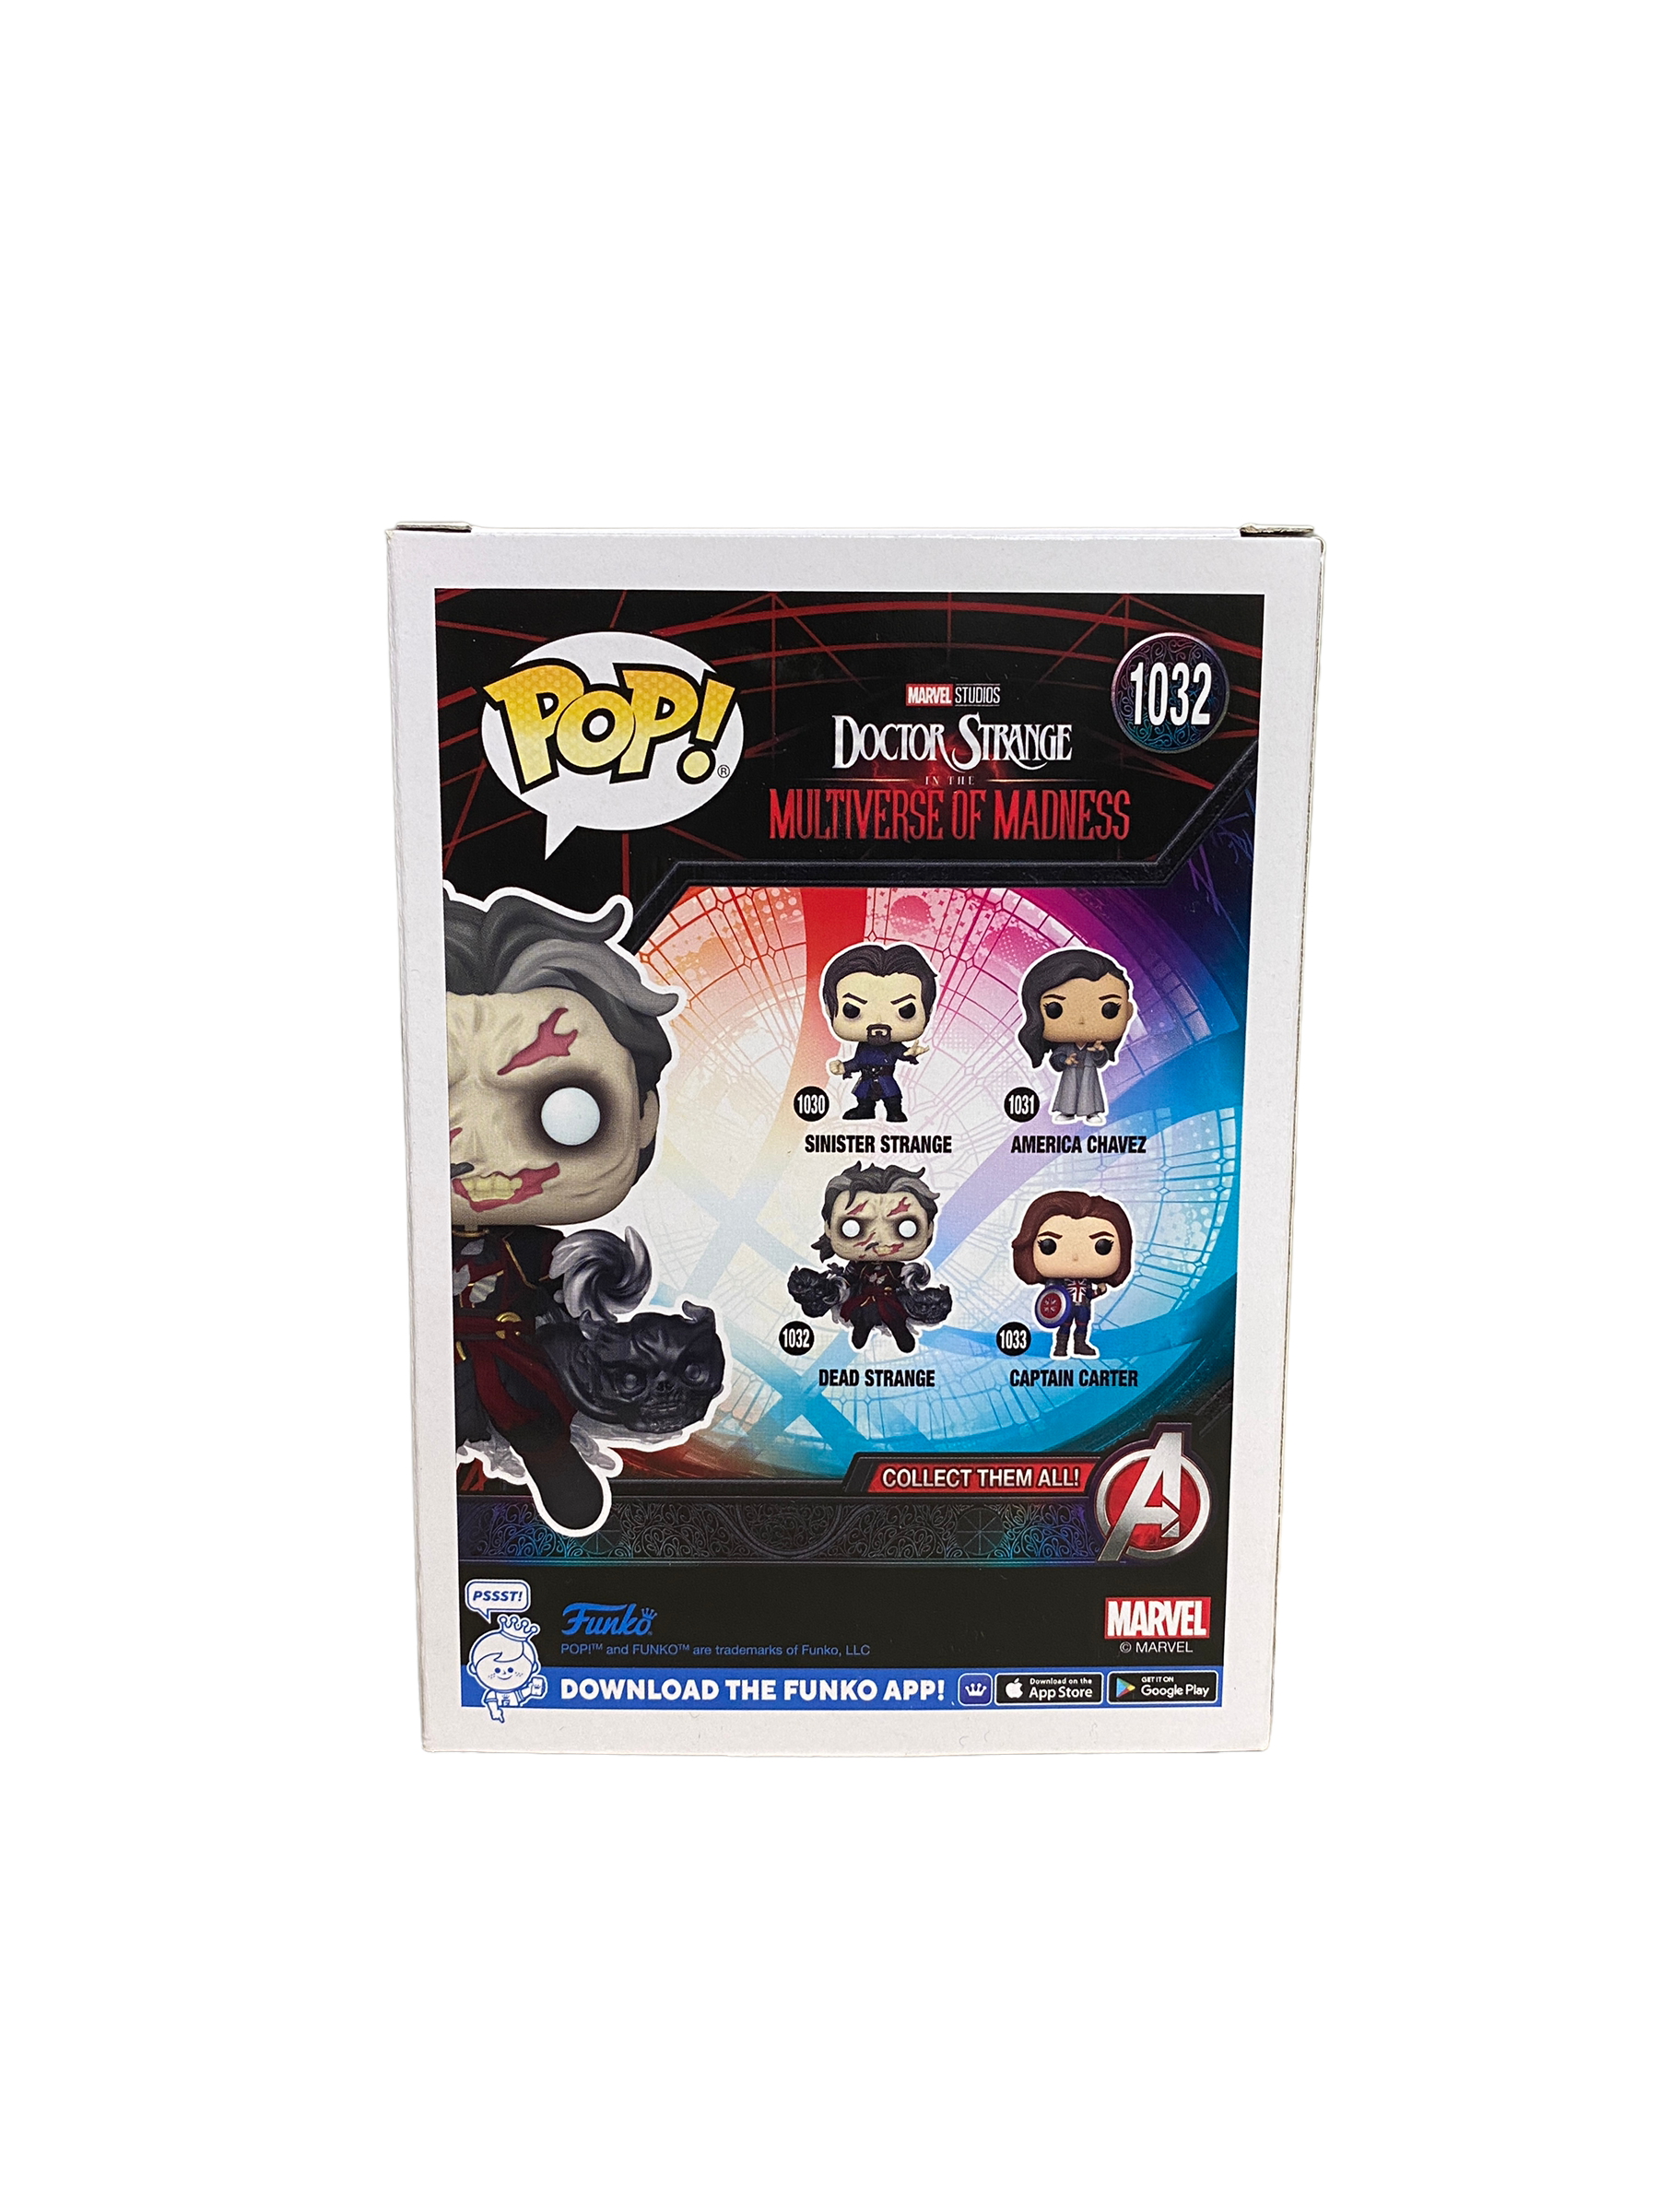 Dead Strange #1032 (Glows In The Dark) Funko Pop! - Doctor Strange In The Multiverse of Madness - Hot Topic Exclusive - Condition 9/10